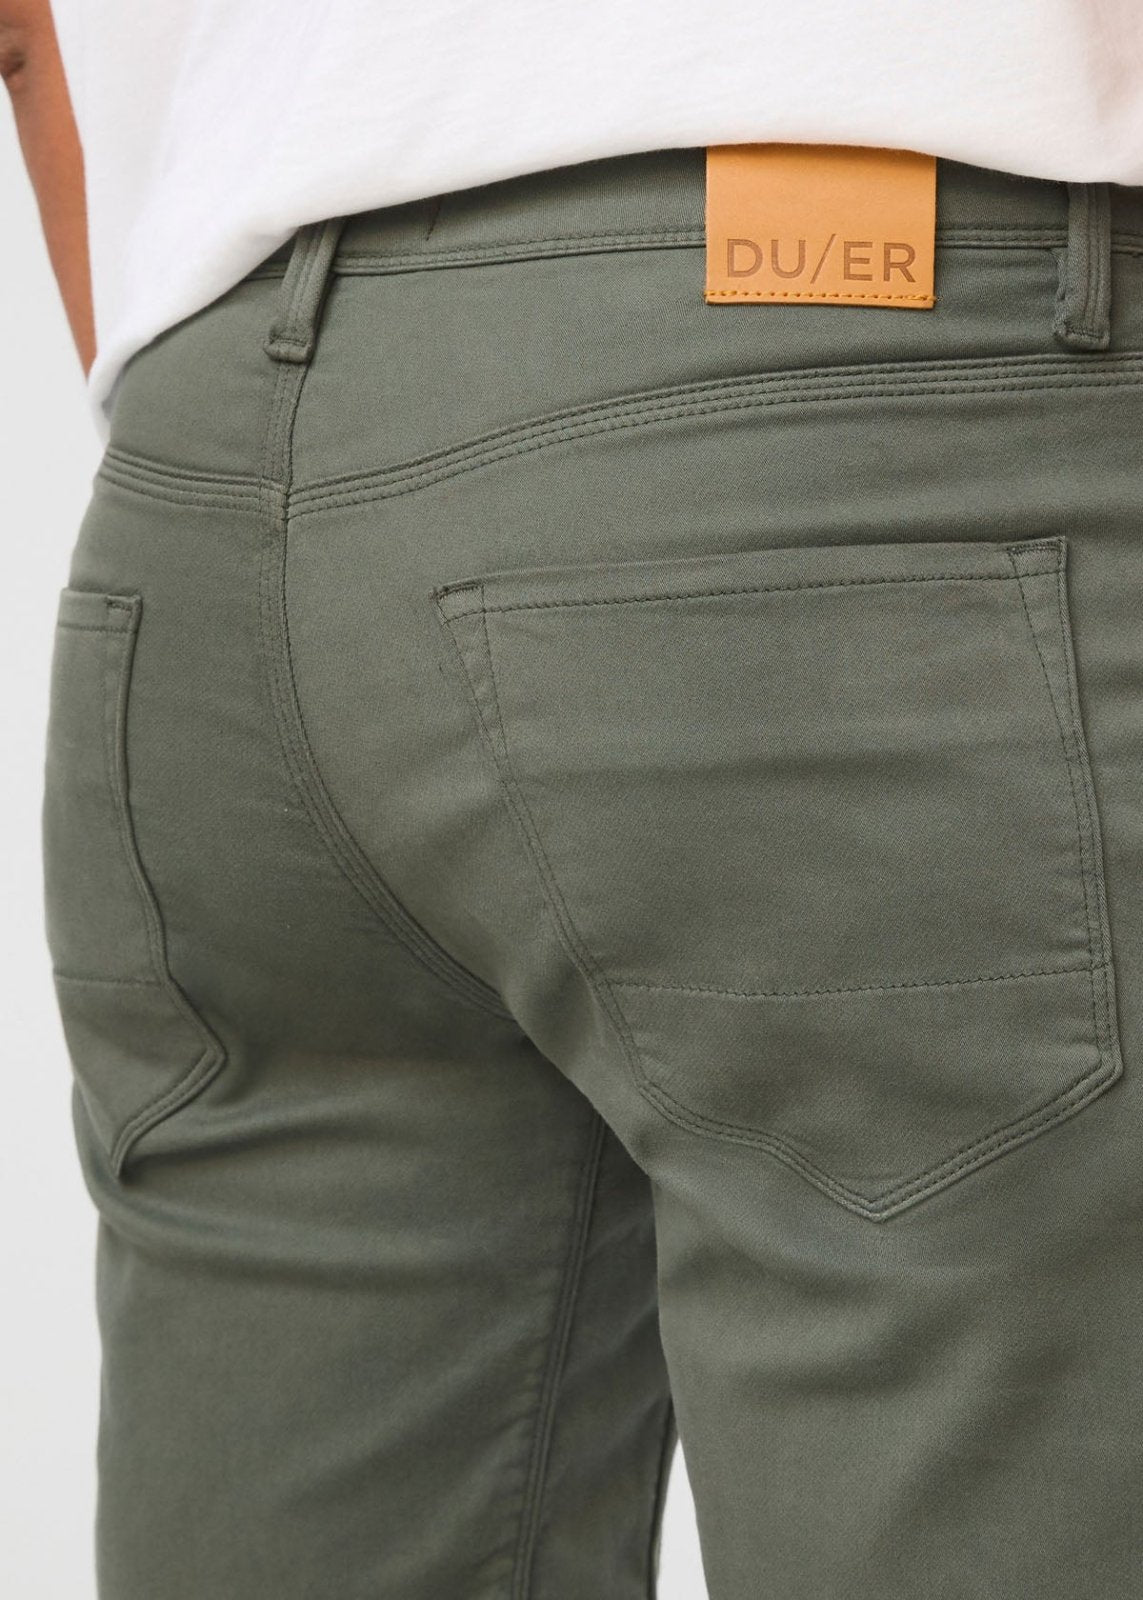 mens grey-green relaxed fit performance short back waistband detail